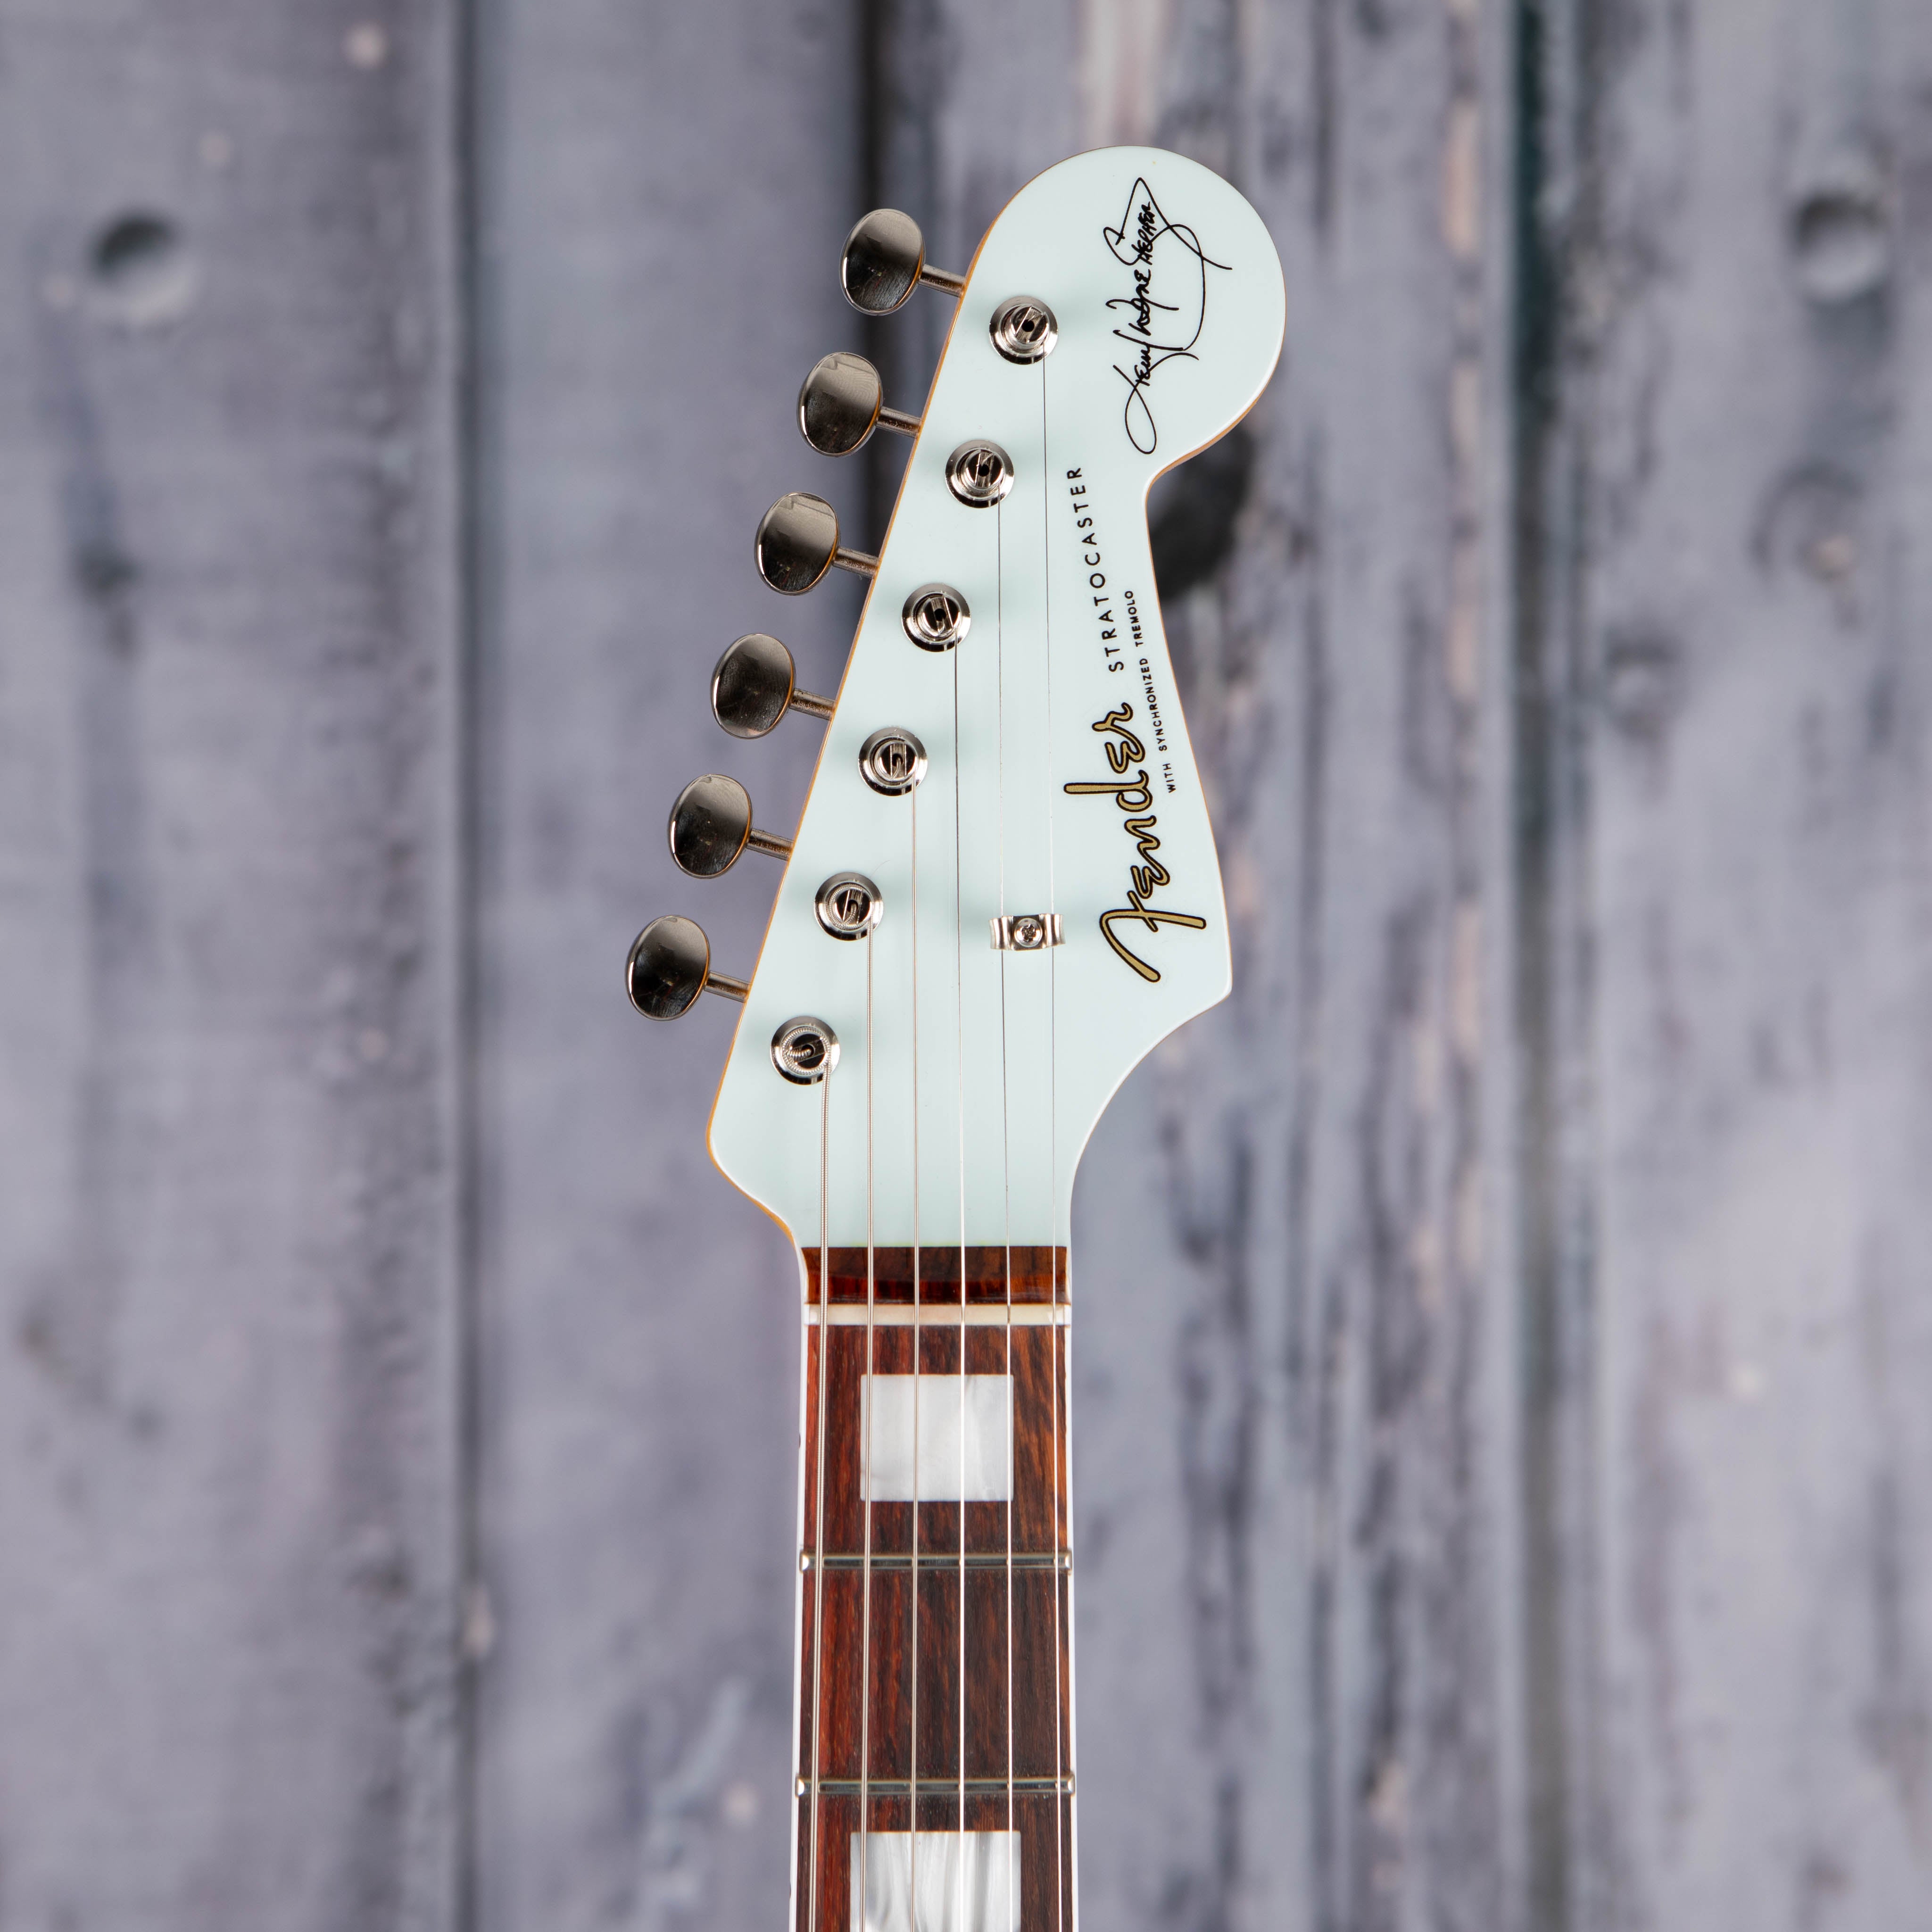 Fender Kenny Wayne Shepherd Stratocaster Electric Guitar, Transparent Faded Sonic Blue, front headstock